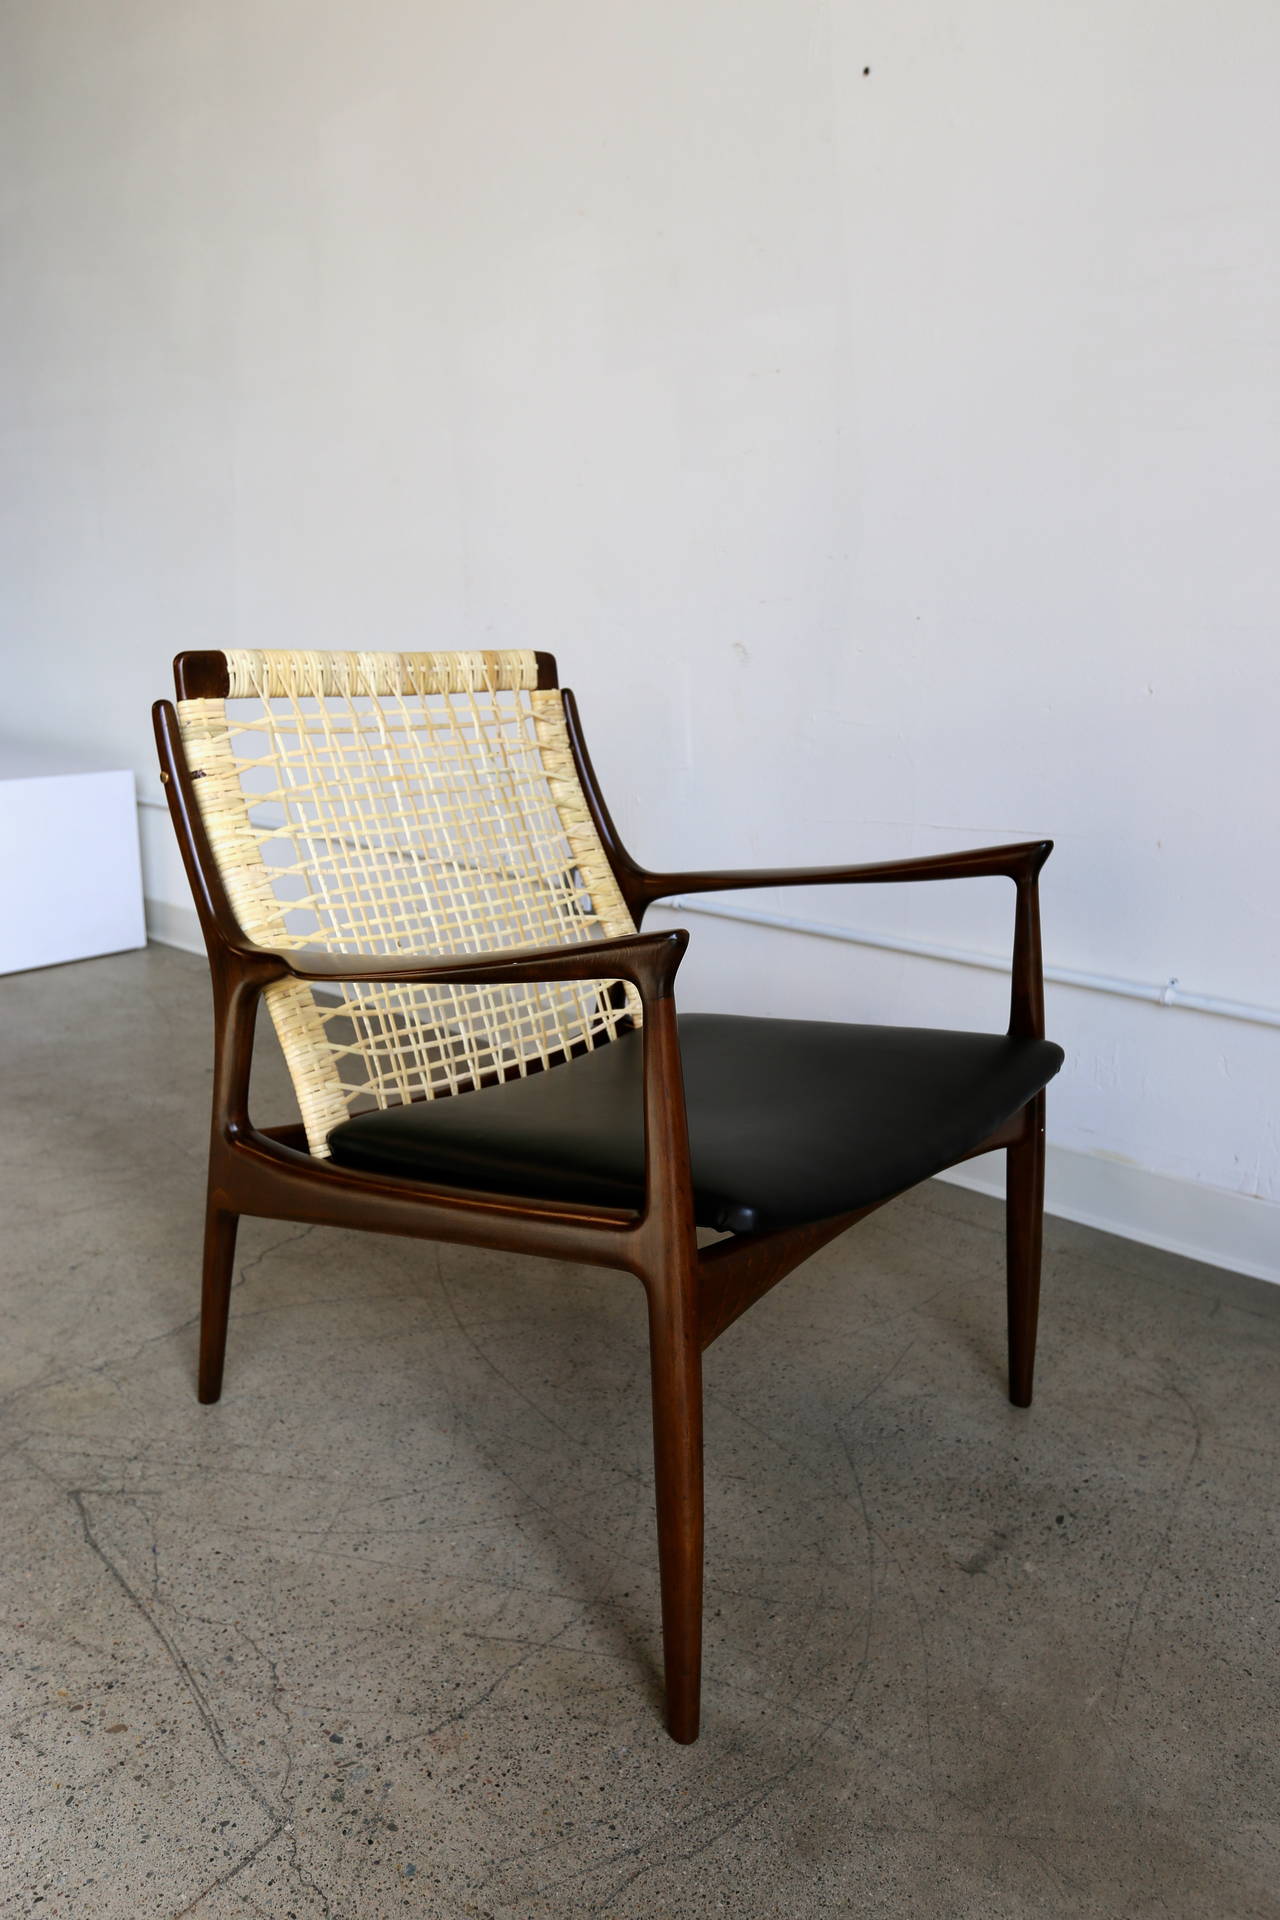 Caned lounge chair by Ib Kofod Larsen for Selig of Denmark.